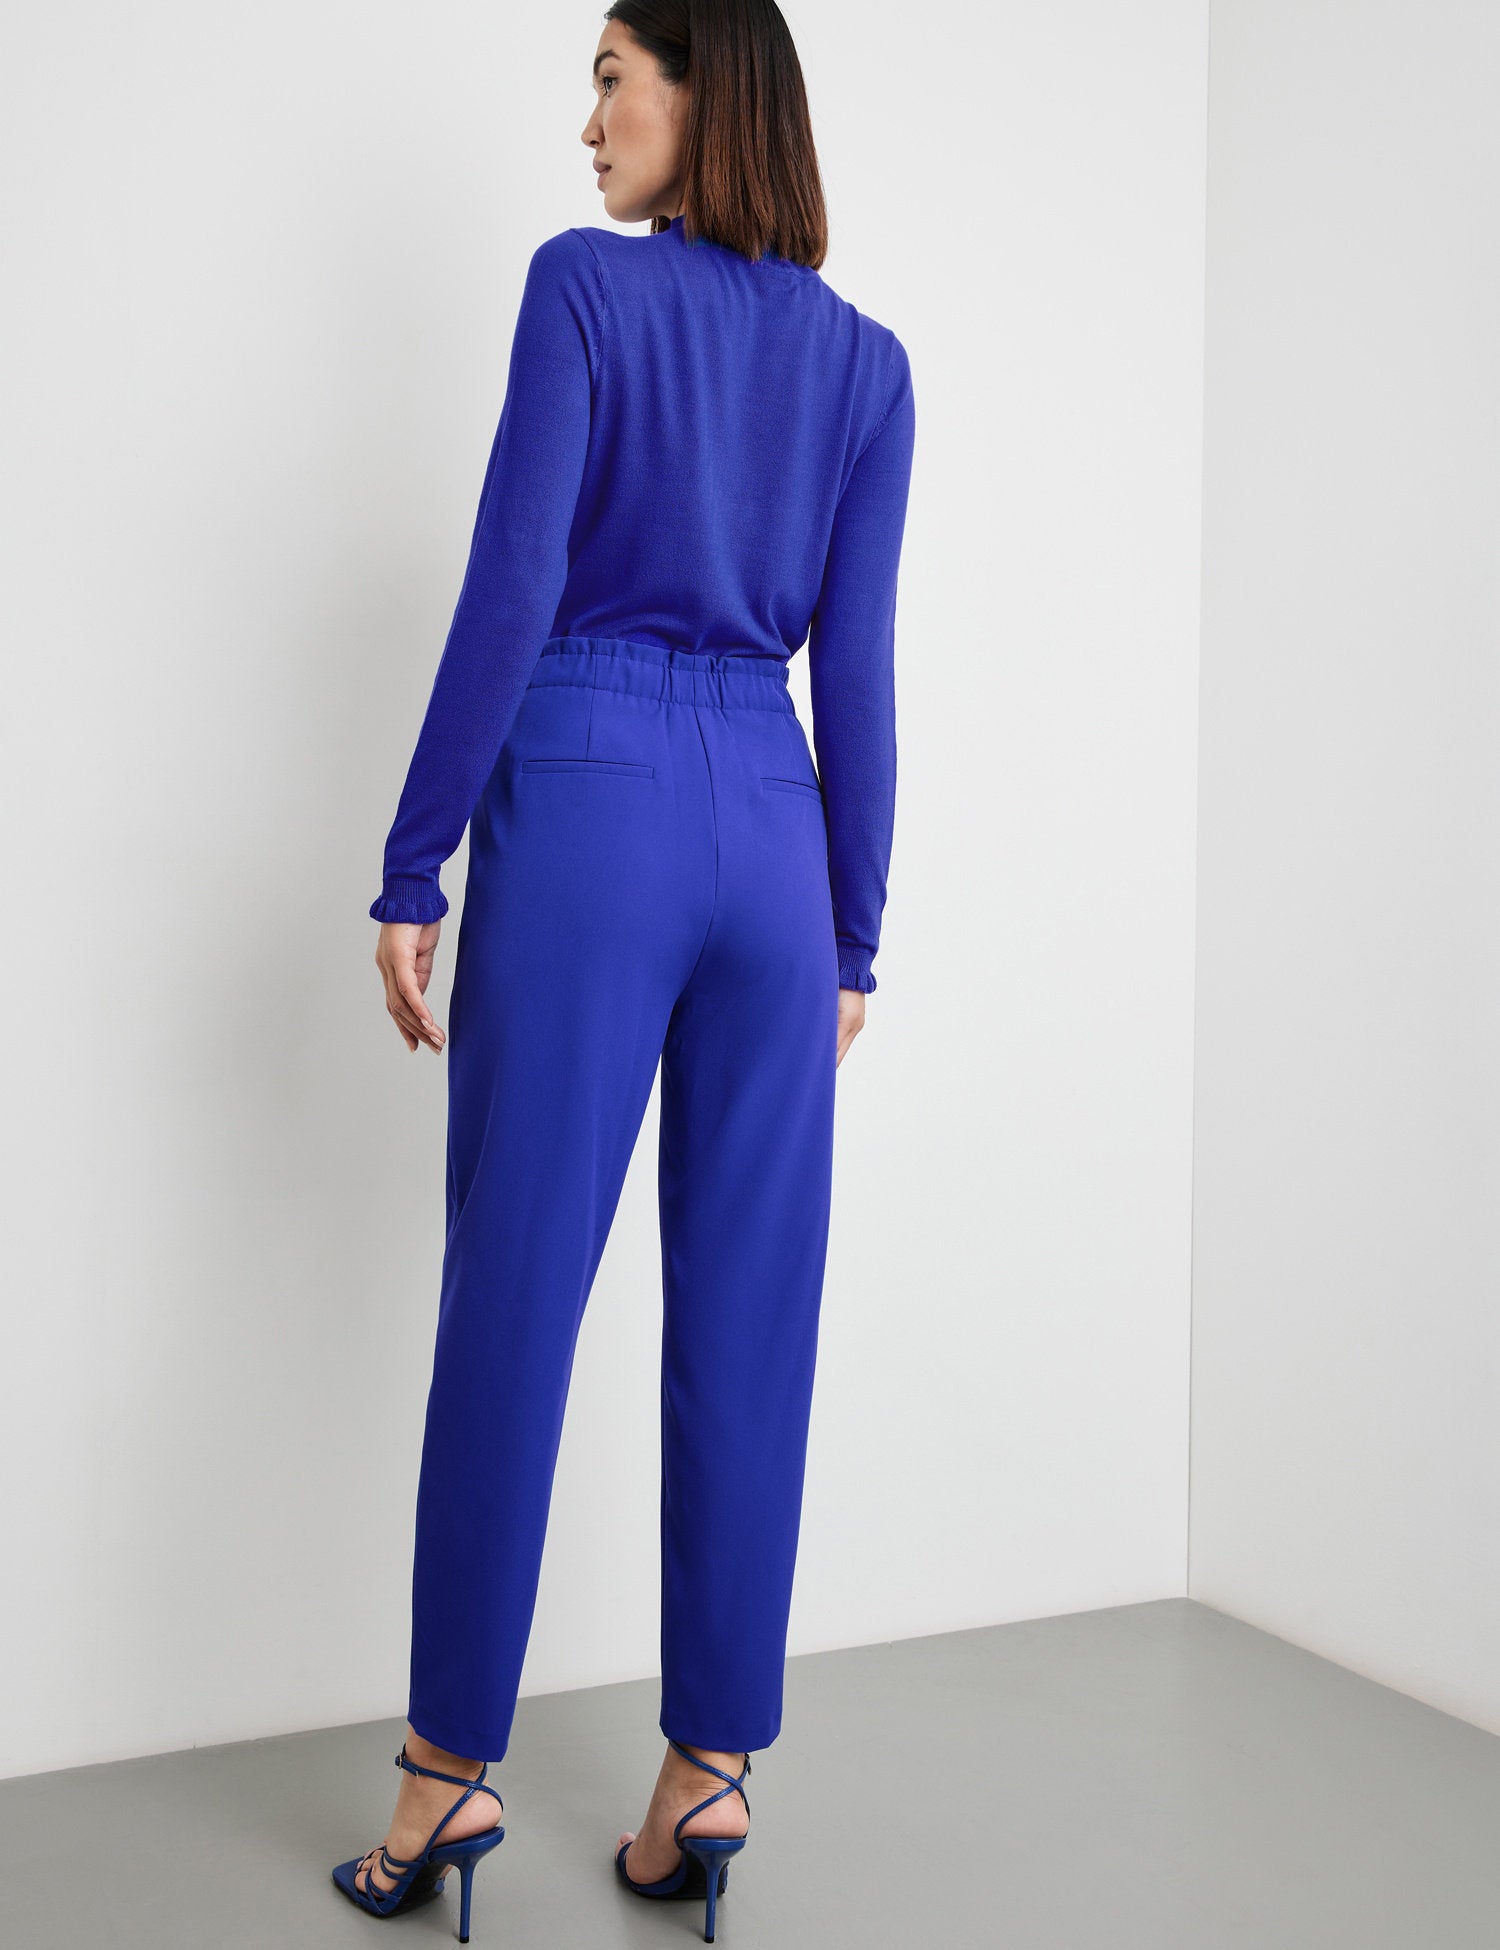 Flowing 7/8-Length Trousers In A Slim Fit_420430-11355_8790_06